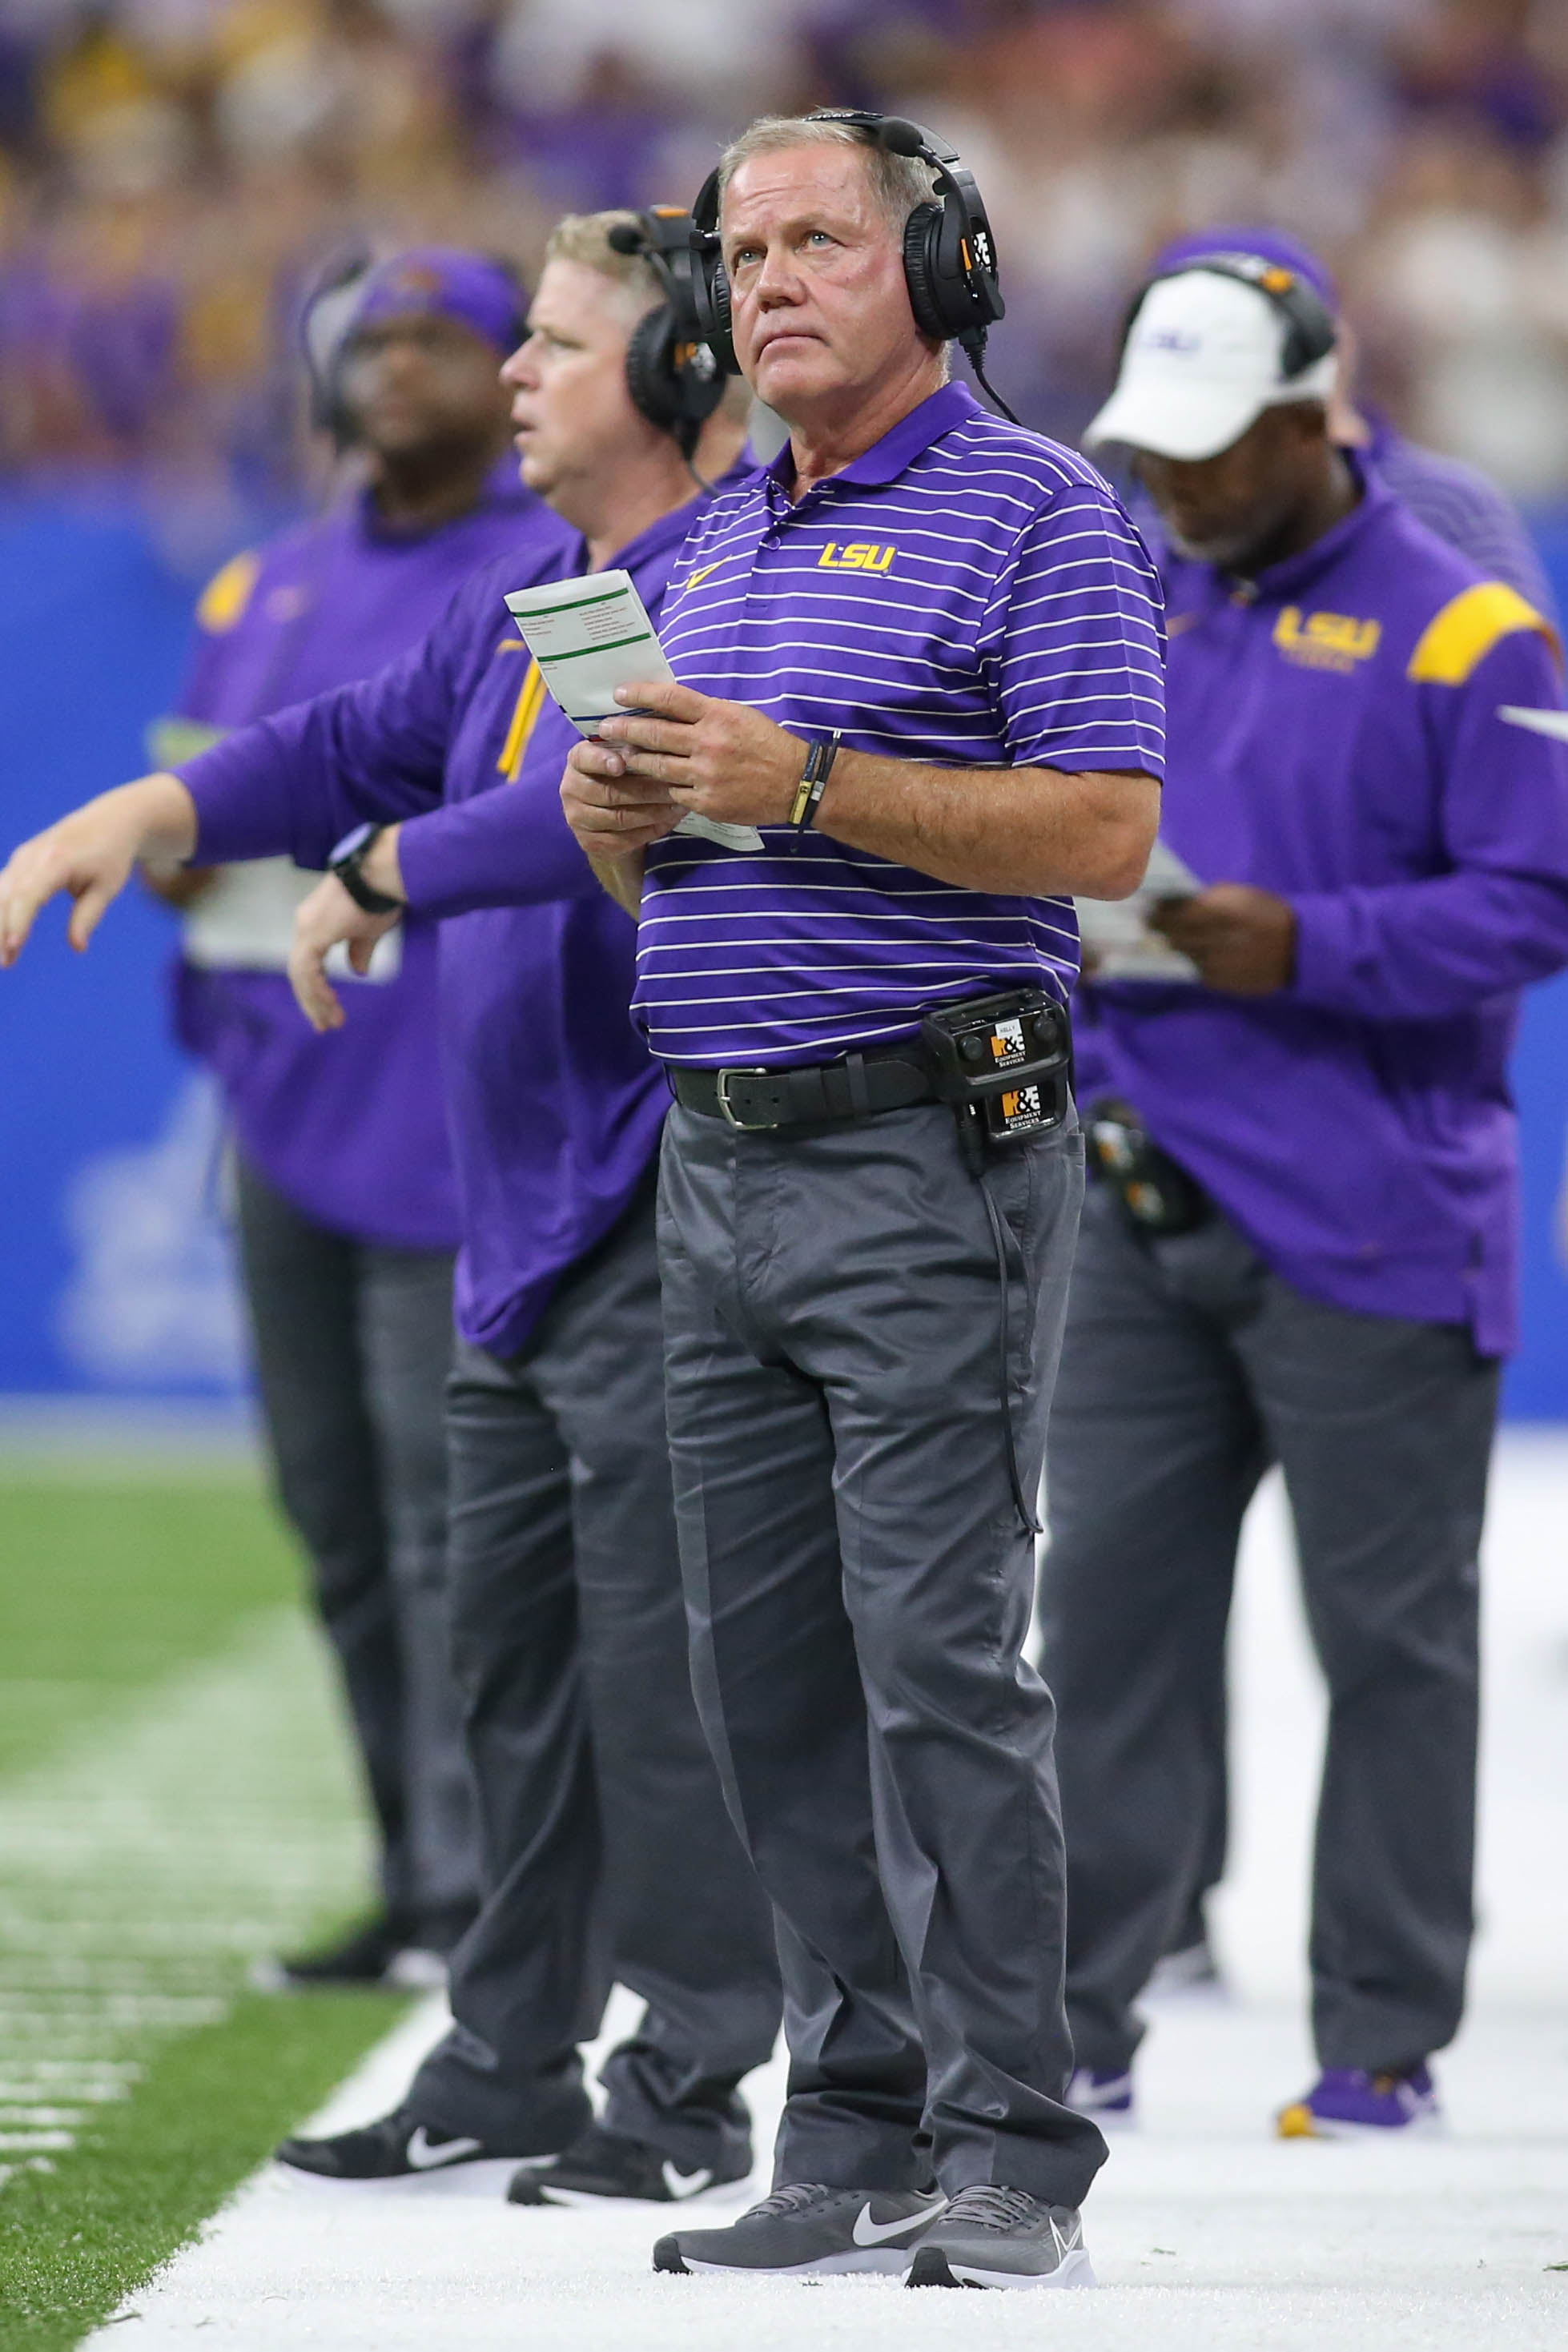 Tiger of the Year: LSU football coach Brian Kelly proves he's right choice  after leading Tigers to SEC West crown in first year | Tiger Rag